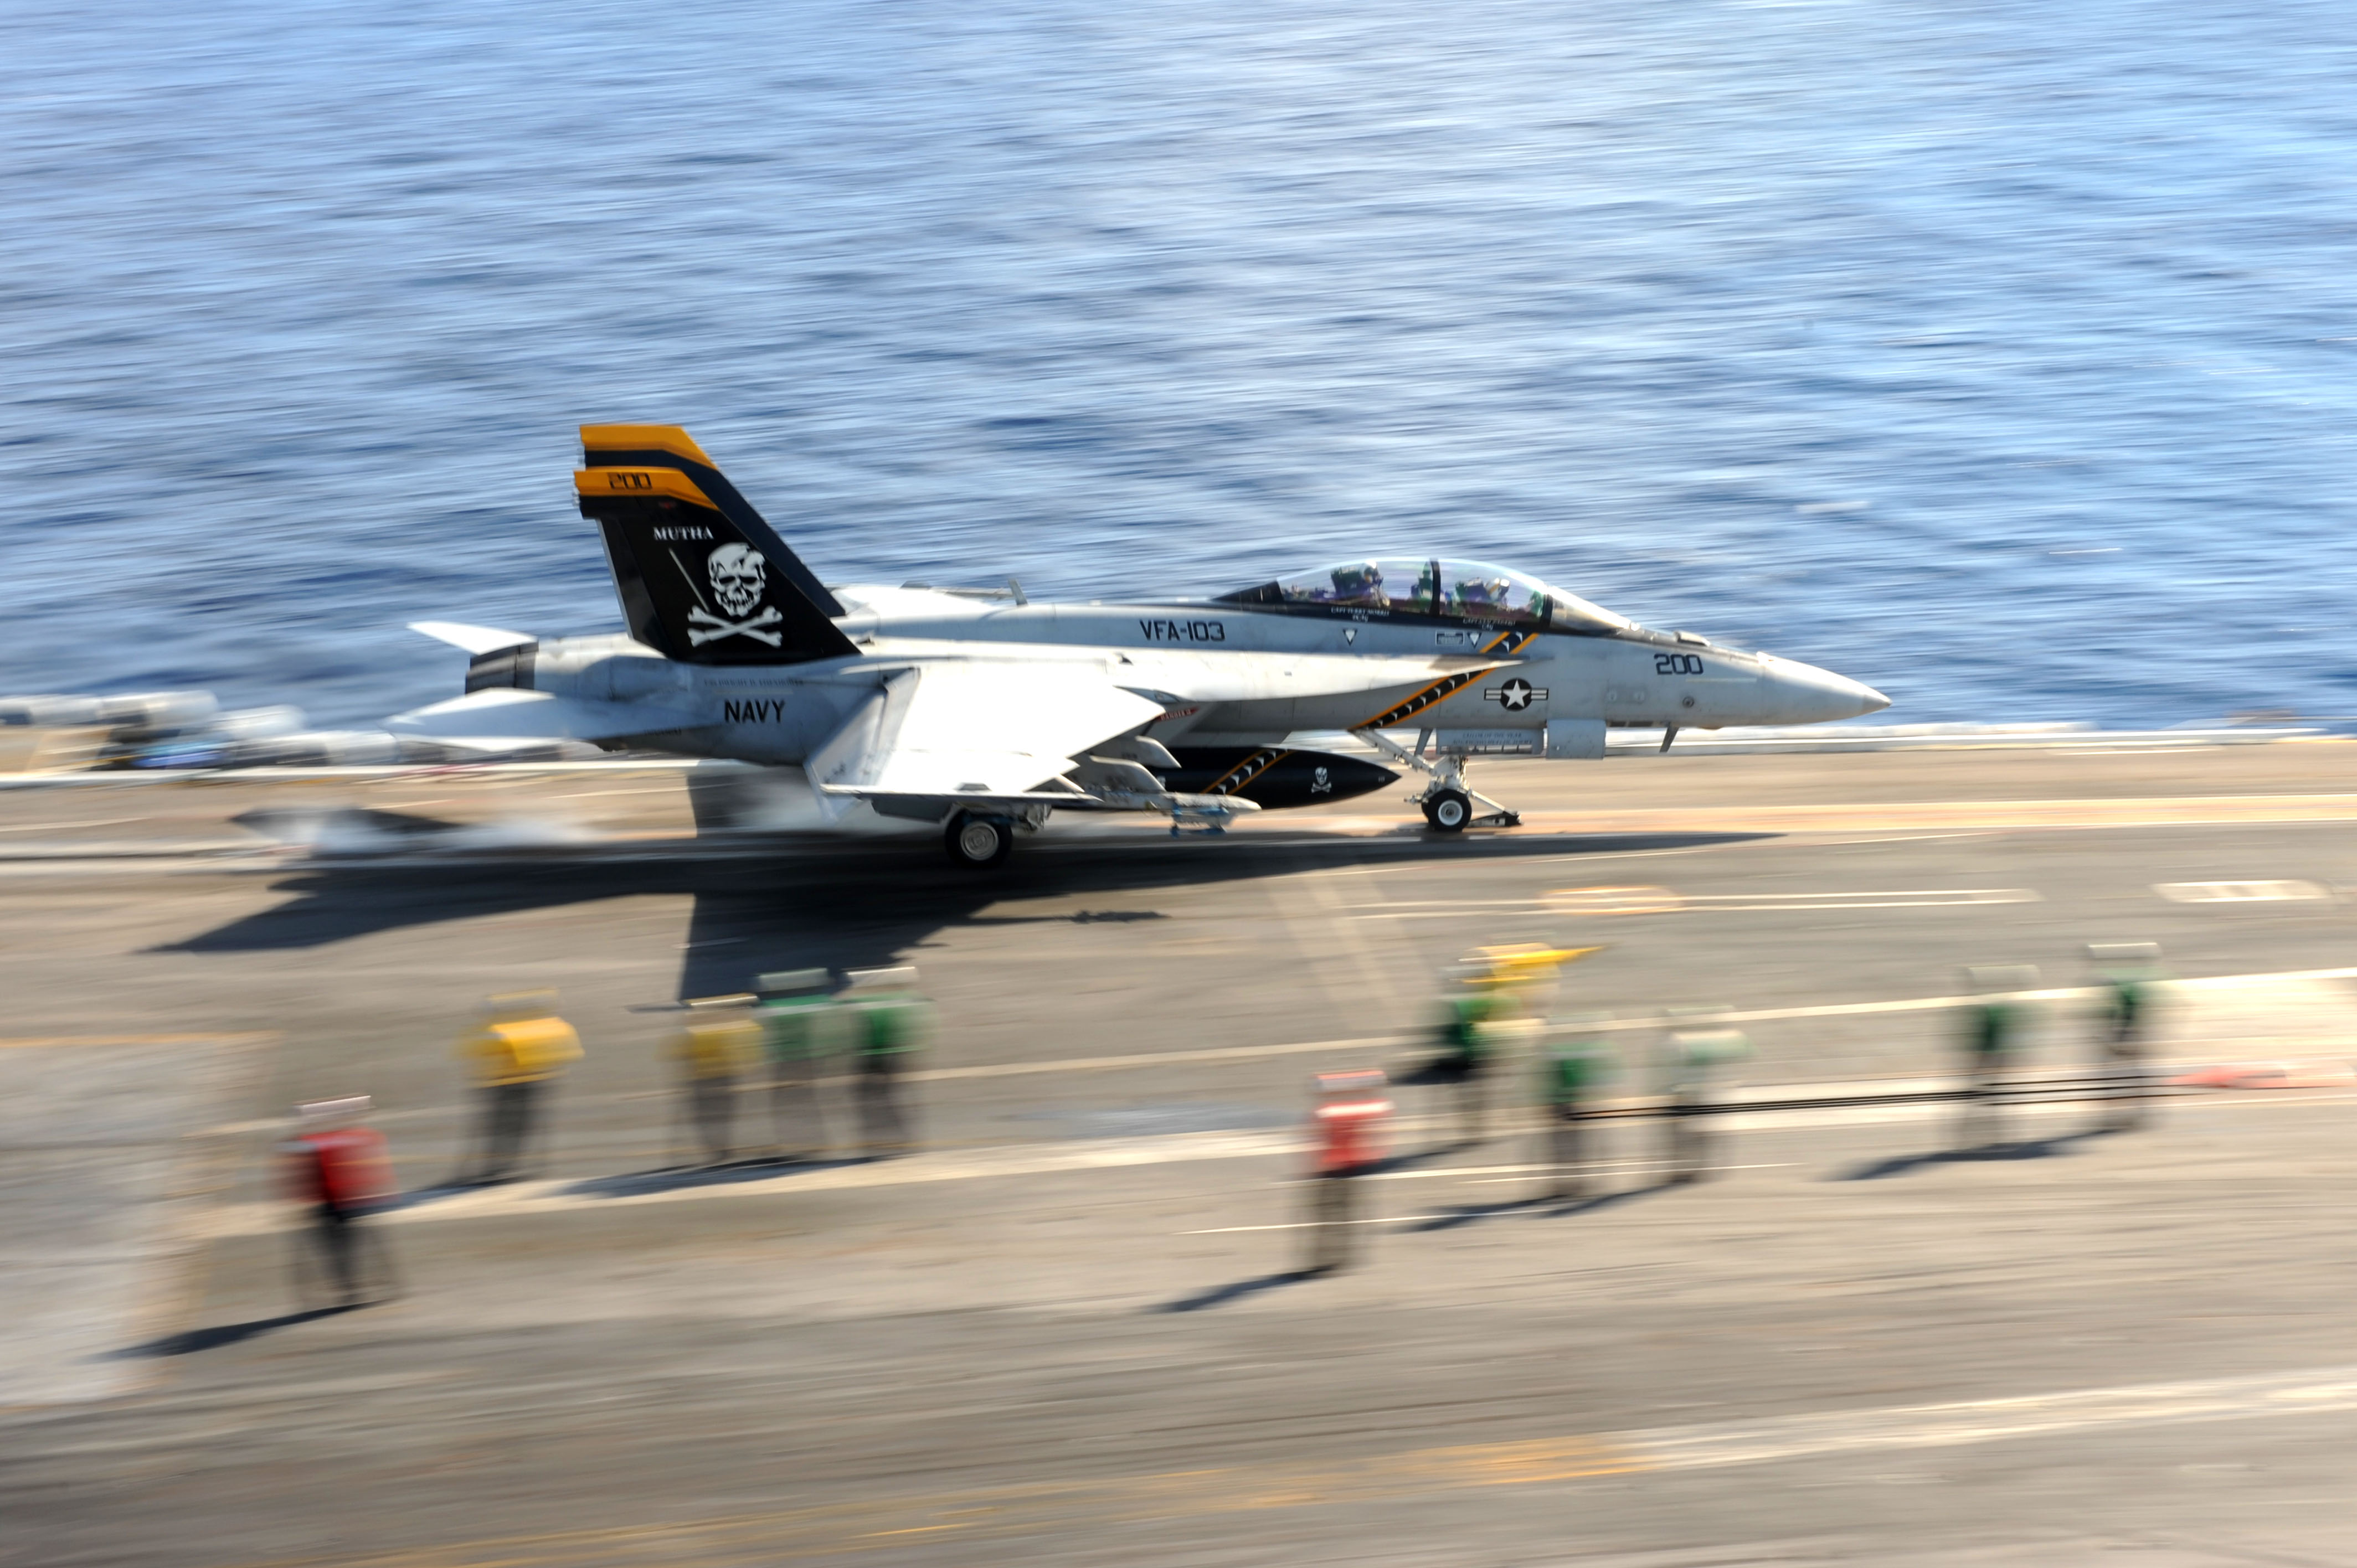 US_Navy_111017-N-AU622-089_An_F-A-18F_Super_Hornet_assigned_to_the_Jolly_Rogers_of_Strike_Fighter_Squadron_(VFA)_103_launches_from_the_flight_deck.jpg